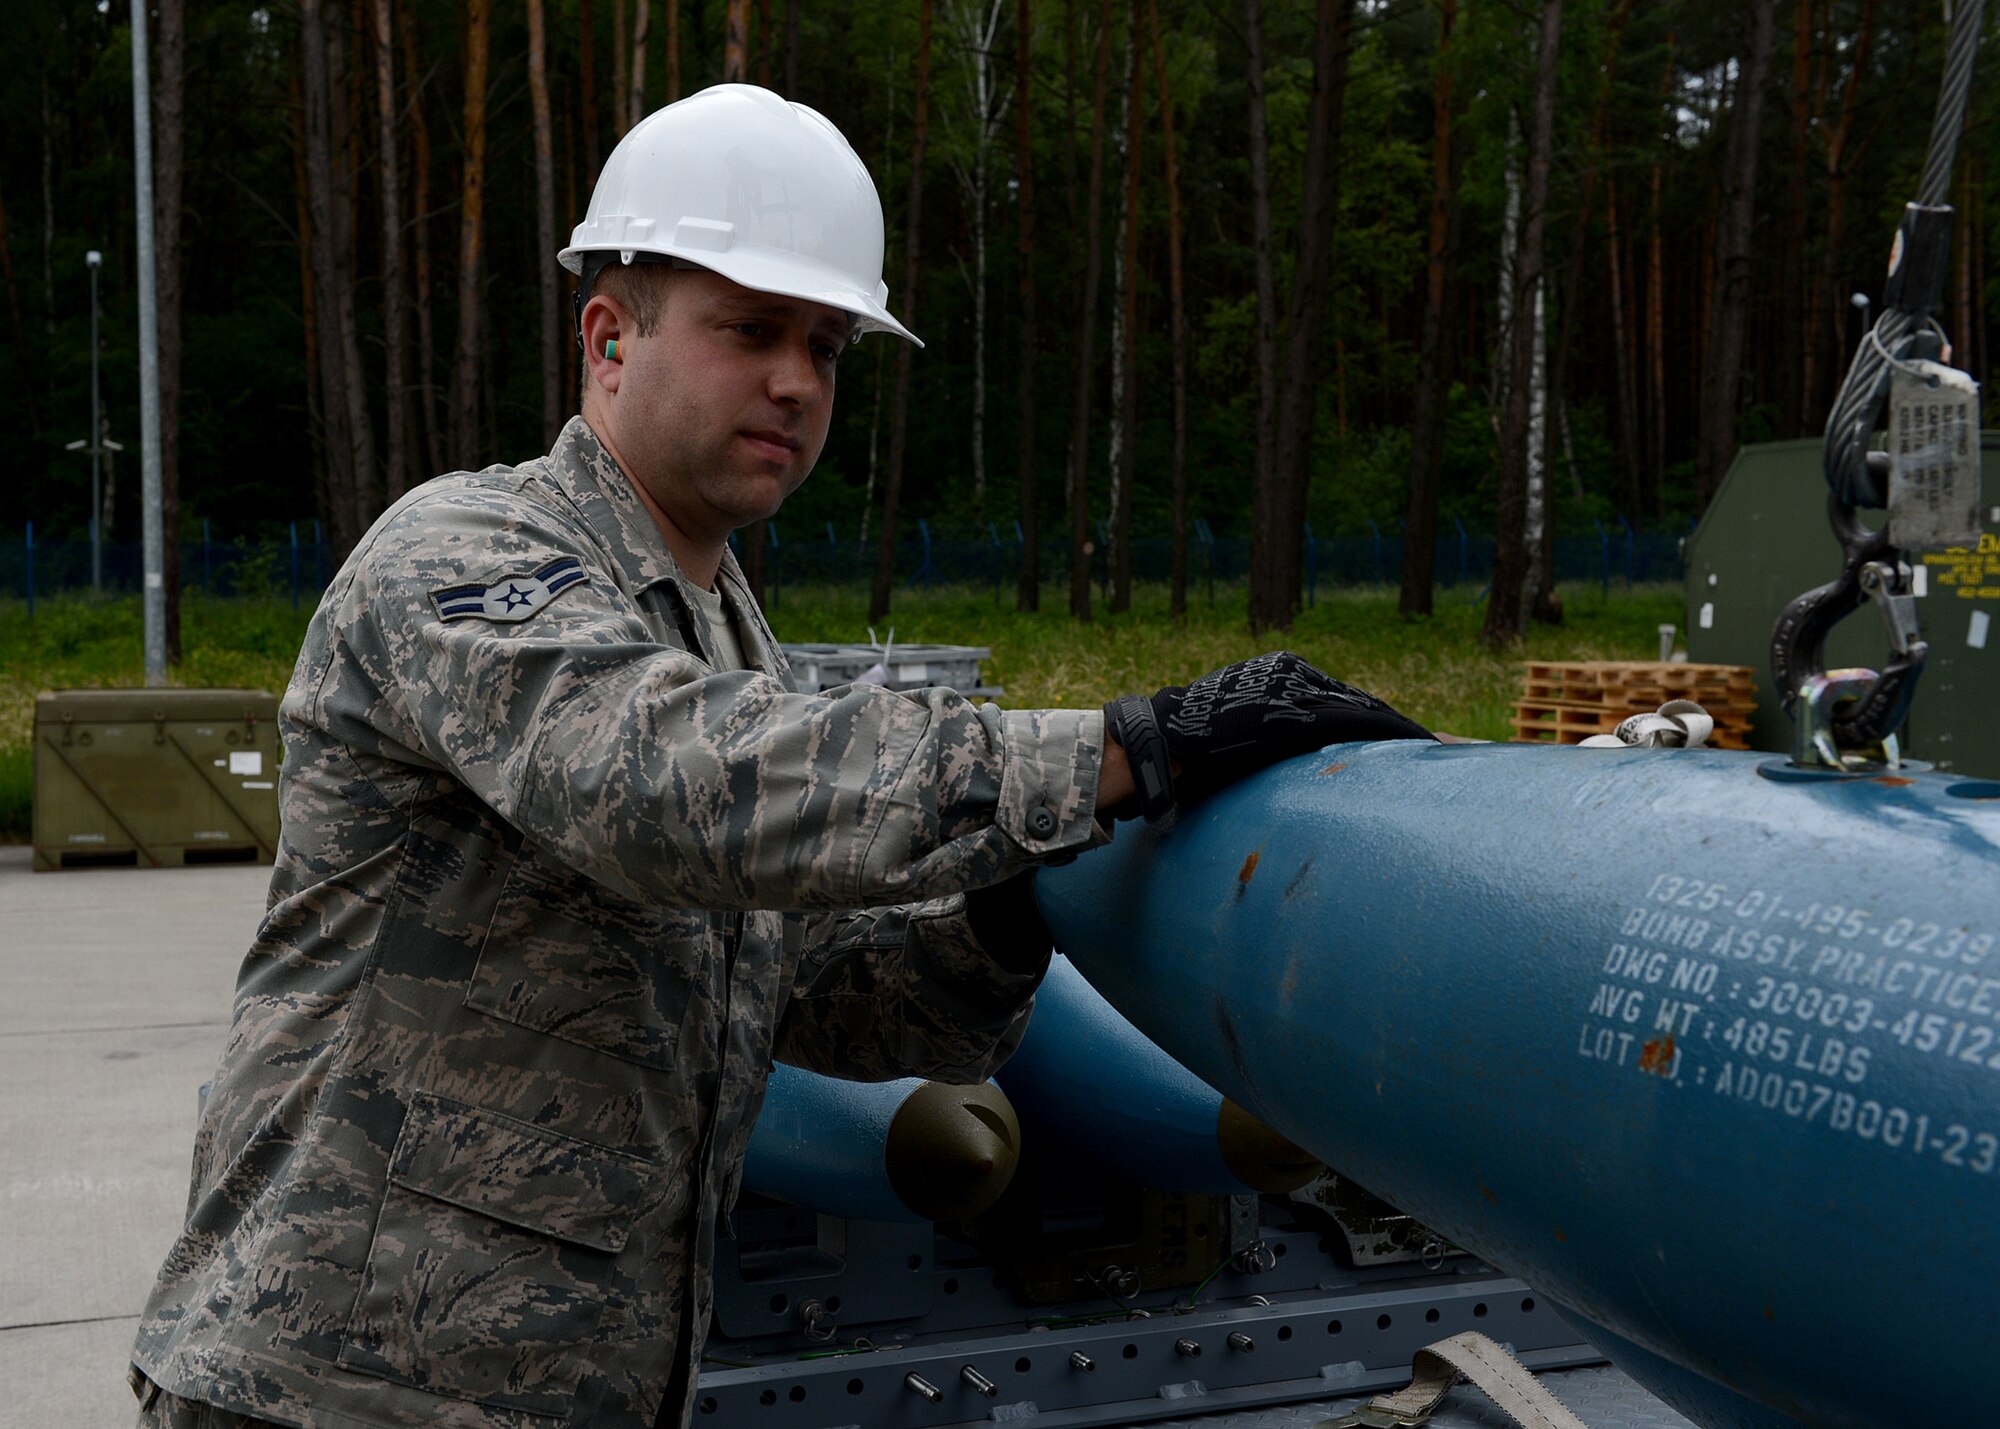 U.S. Air Force Airman 1st Class Joseph Stoffer, 52nd Equipment Maintenance Squadron conventional maintenance crew member from Warsaw, N.Y., guides a Bomb Drop Unit-50 onto a transport trailer at Lask Air Base, Poland, June 12, 2014. Nearly 400 Airmen from Spangdahlem Air Base, Germany, and 18 F-16 Fighter Falcon fighter aircraft supported the U.S. Aviation Detachment Rotation 14-3 and participated in exercises EAGLE TALON and BALTOPS 14. (U.S. Air Force photo by Airman 1st Class Kyle Gese/Released)